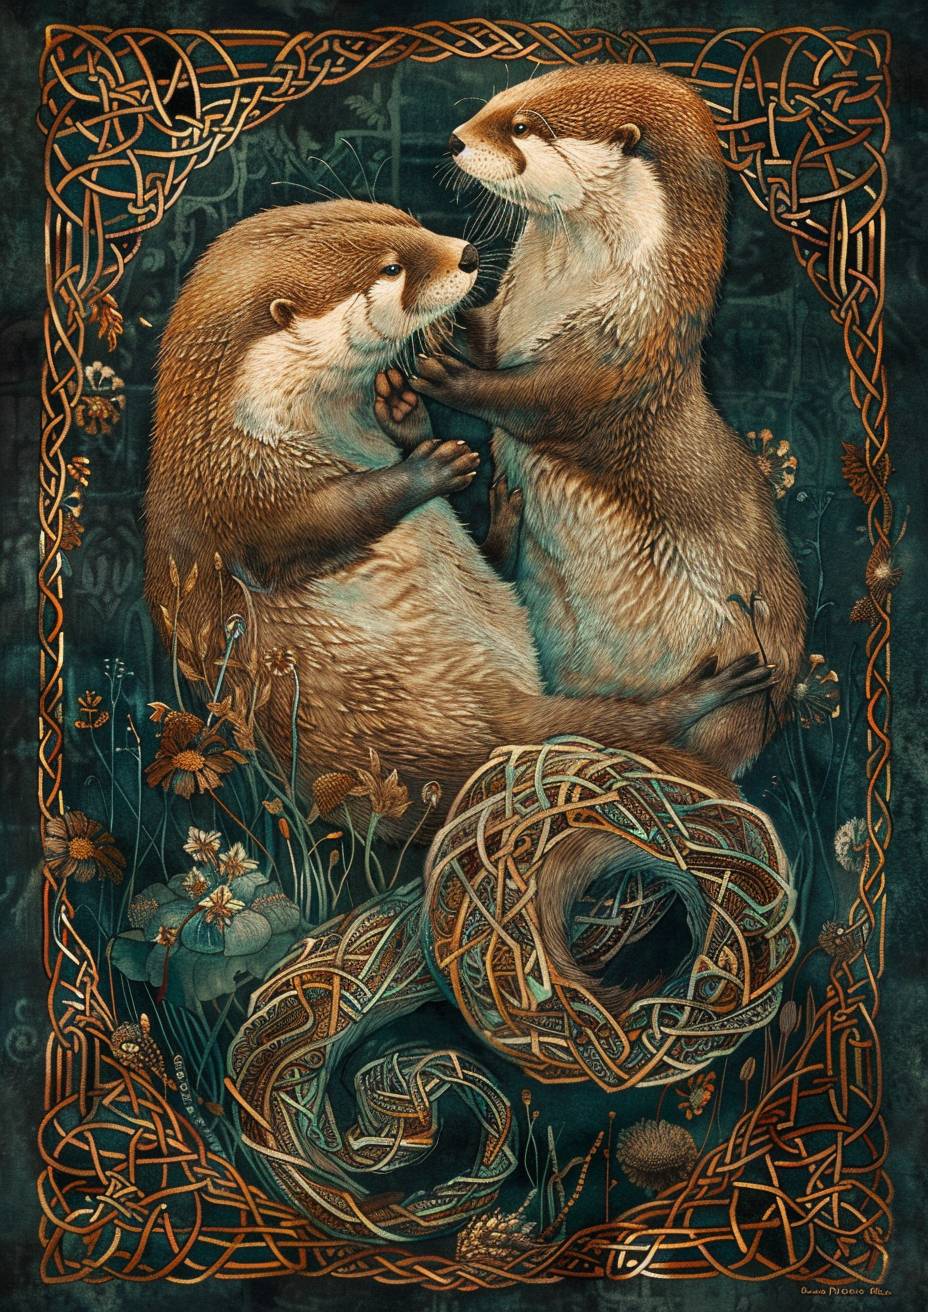 A tapestry featuring two otters intertwined, in the style of Celtic silver knotwork, with a dark background and teal and copper colors, creating a strong visual flow.